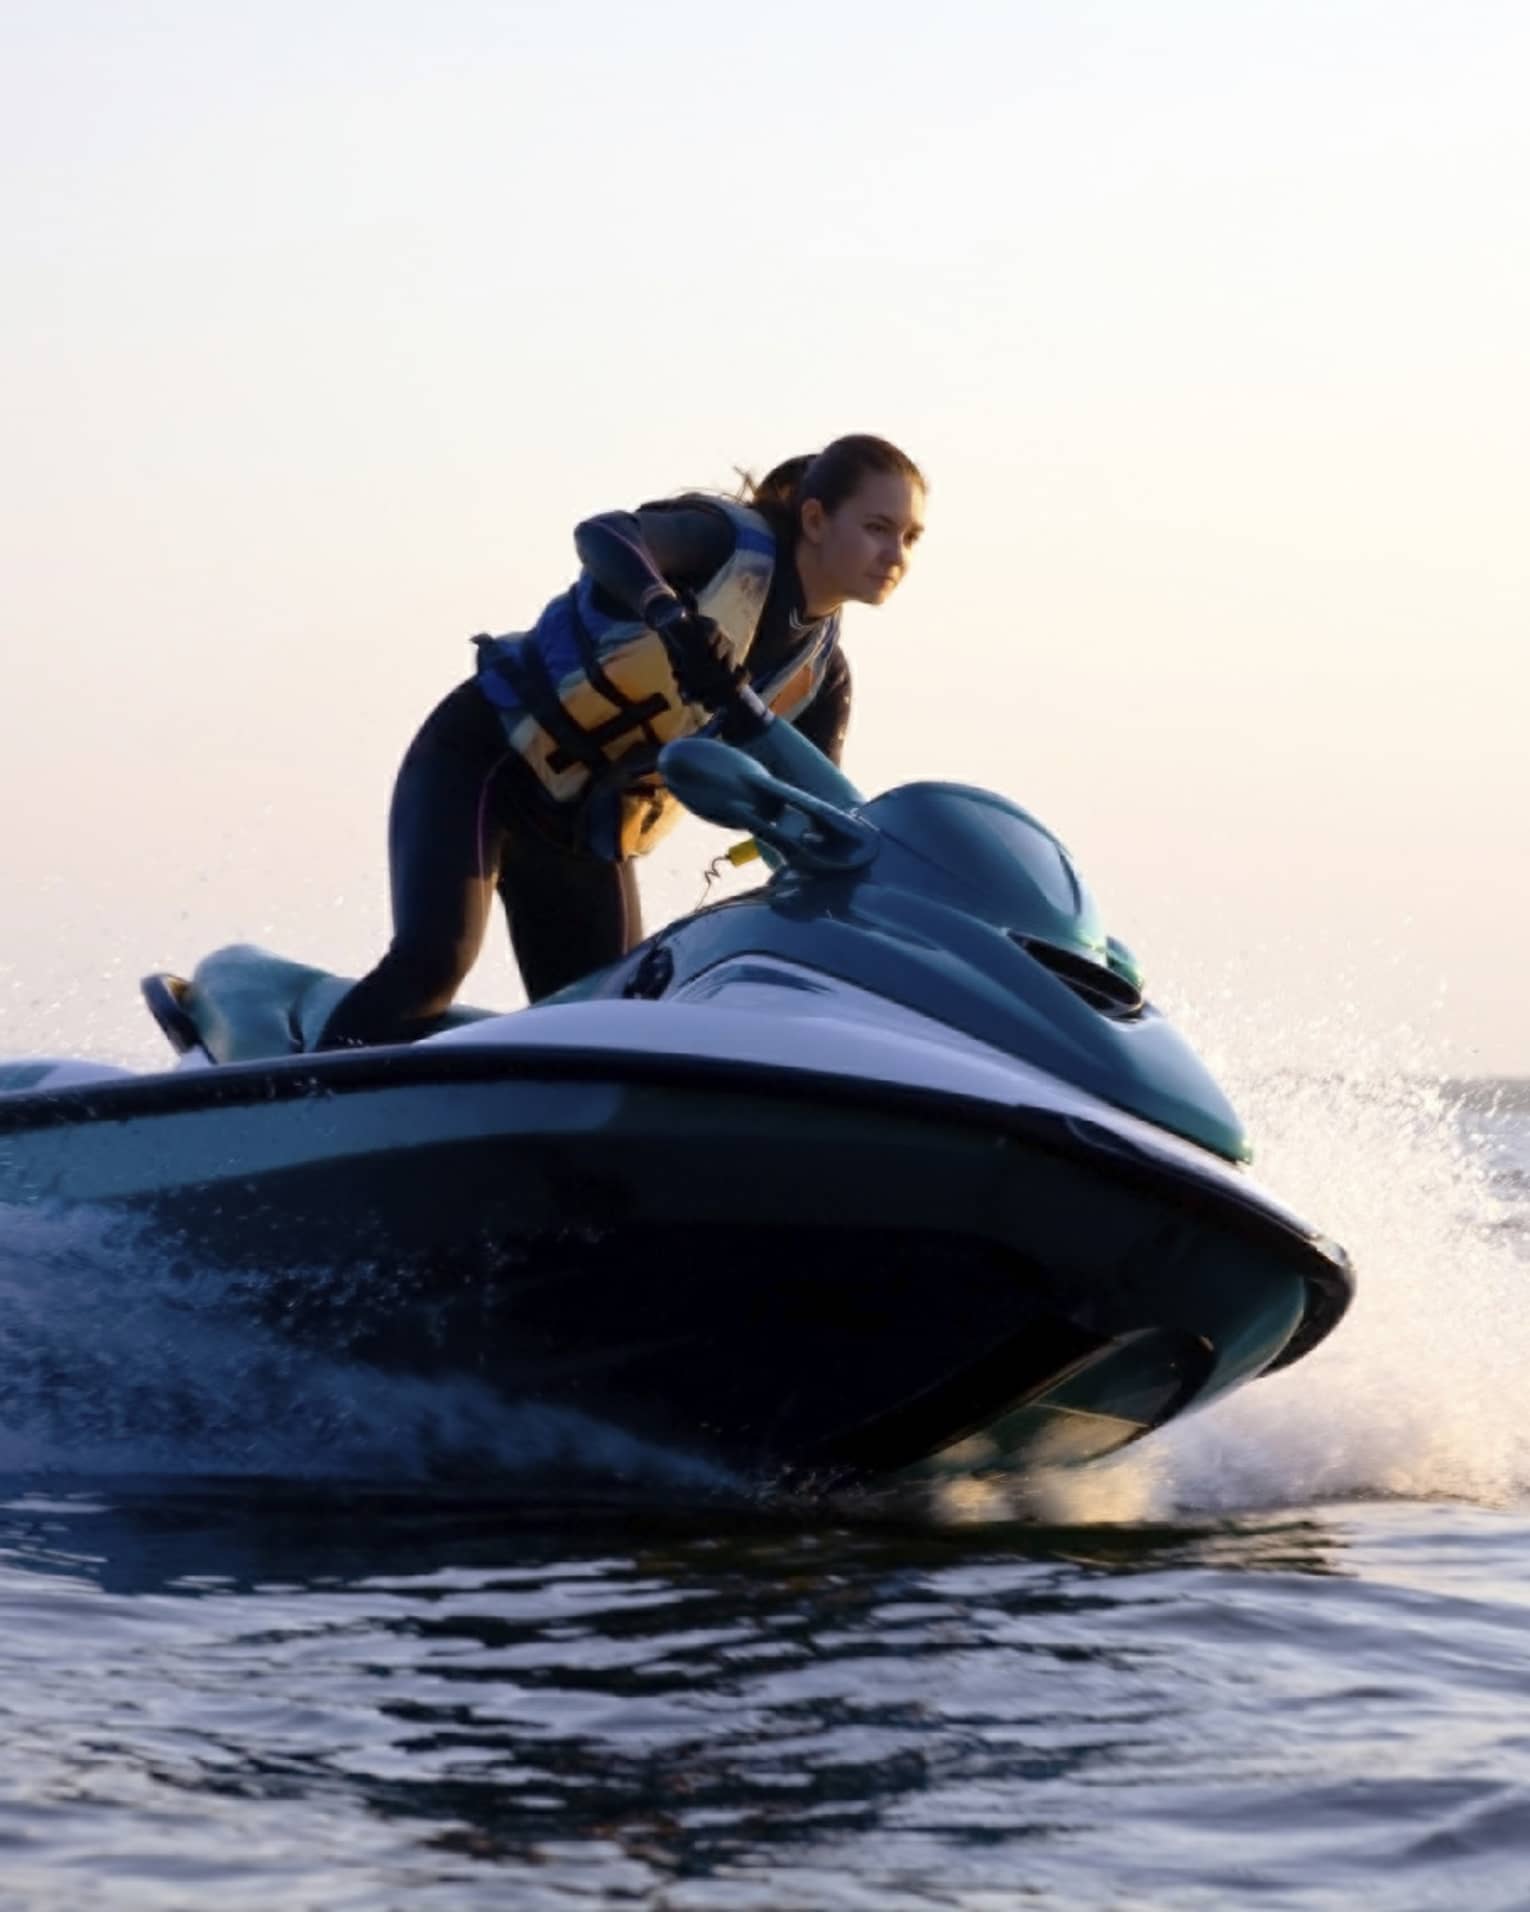 Woman wearing life jacket stands, steers jet ski on ocean at sunset